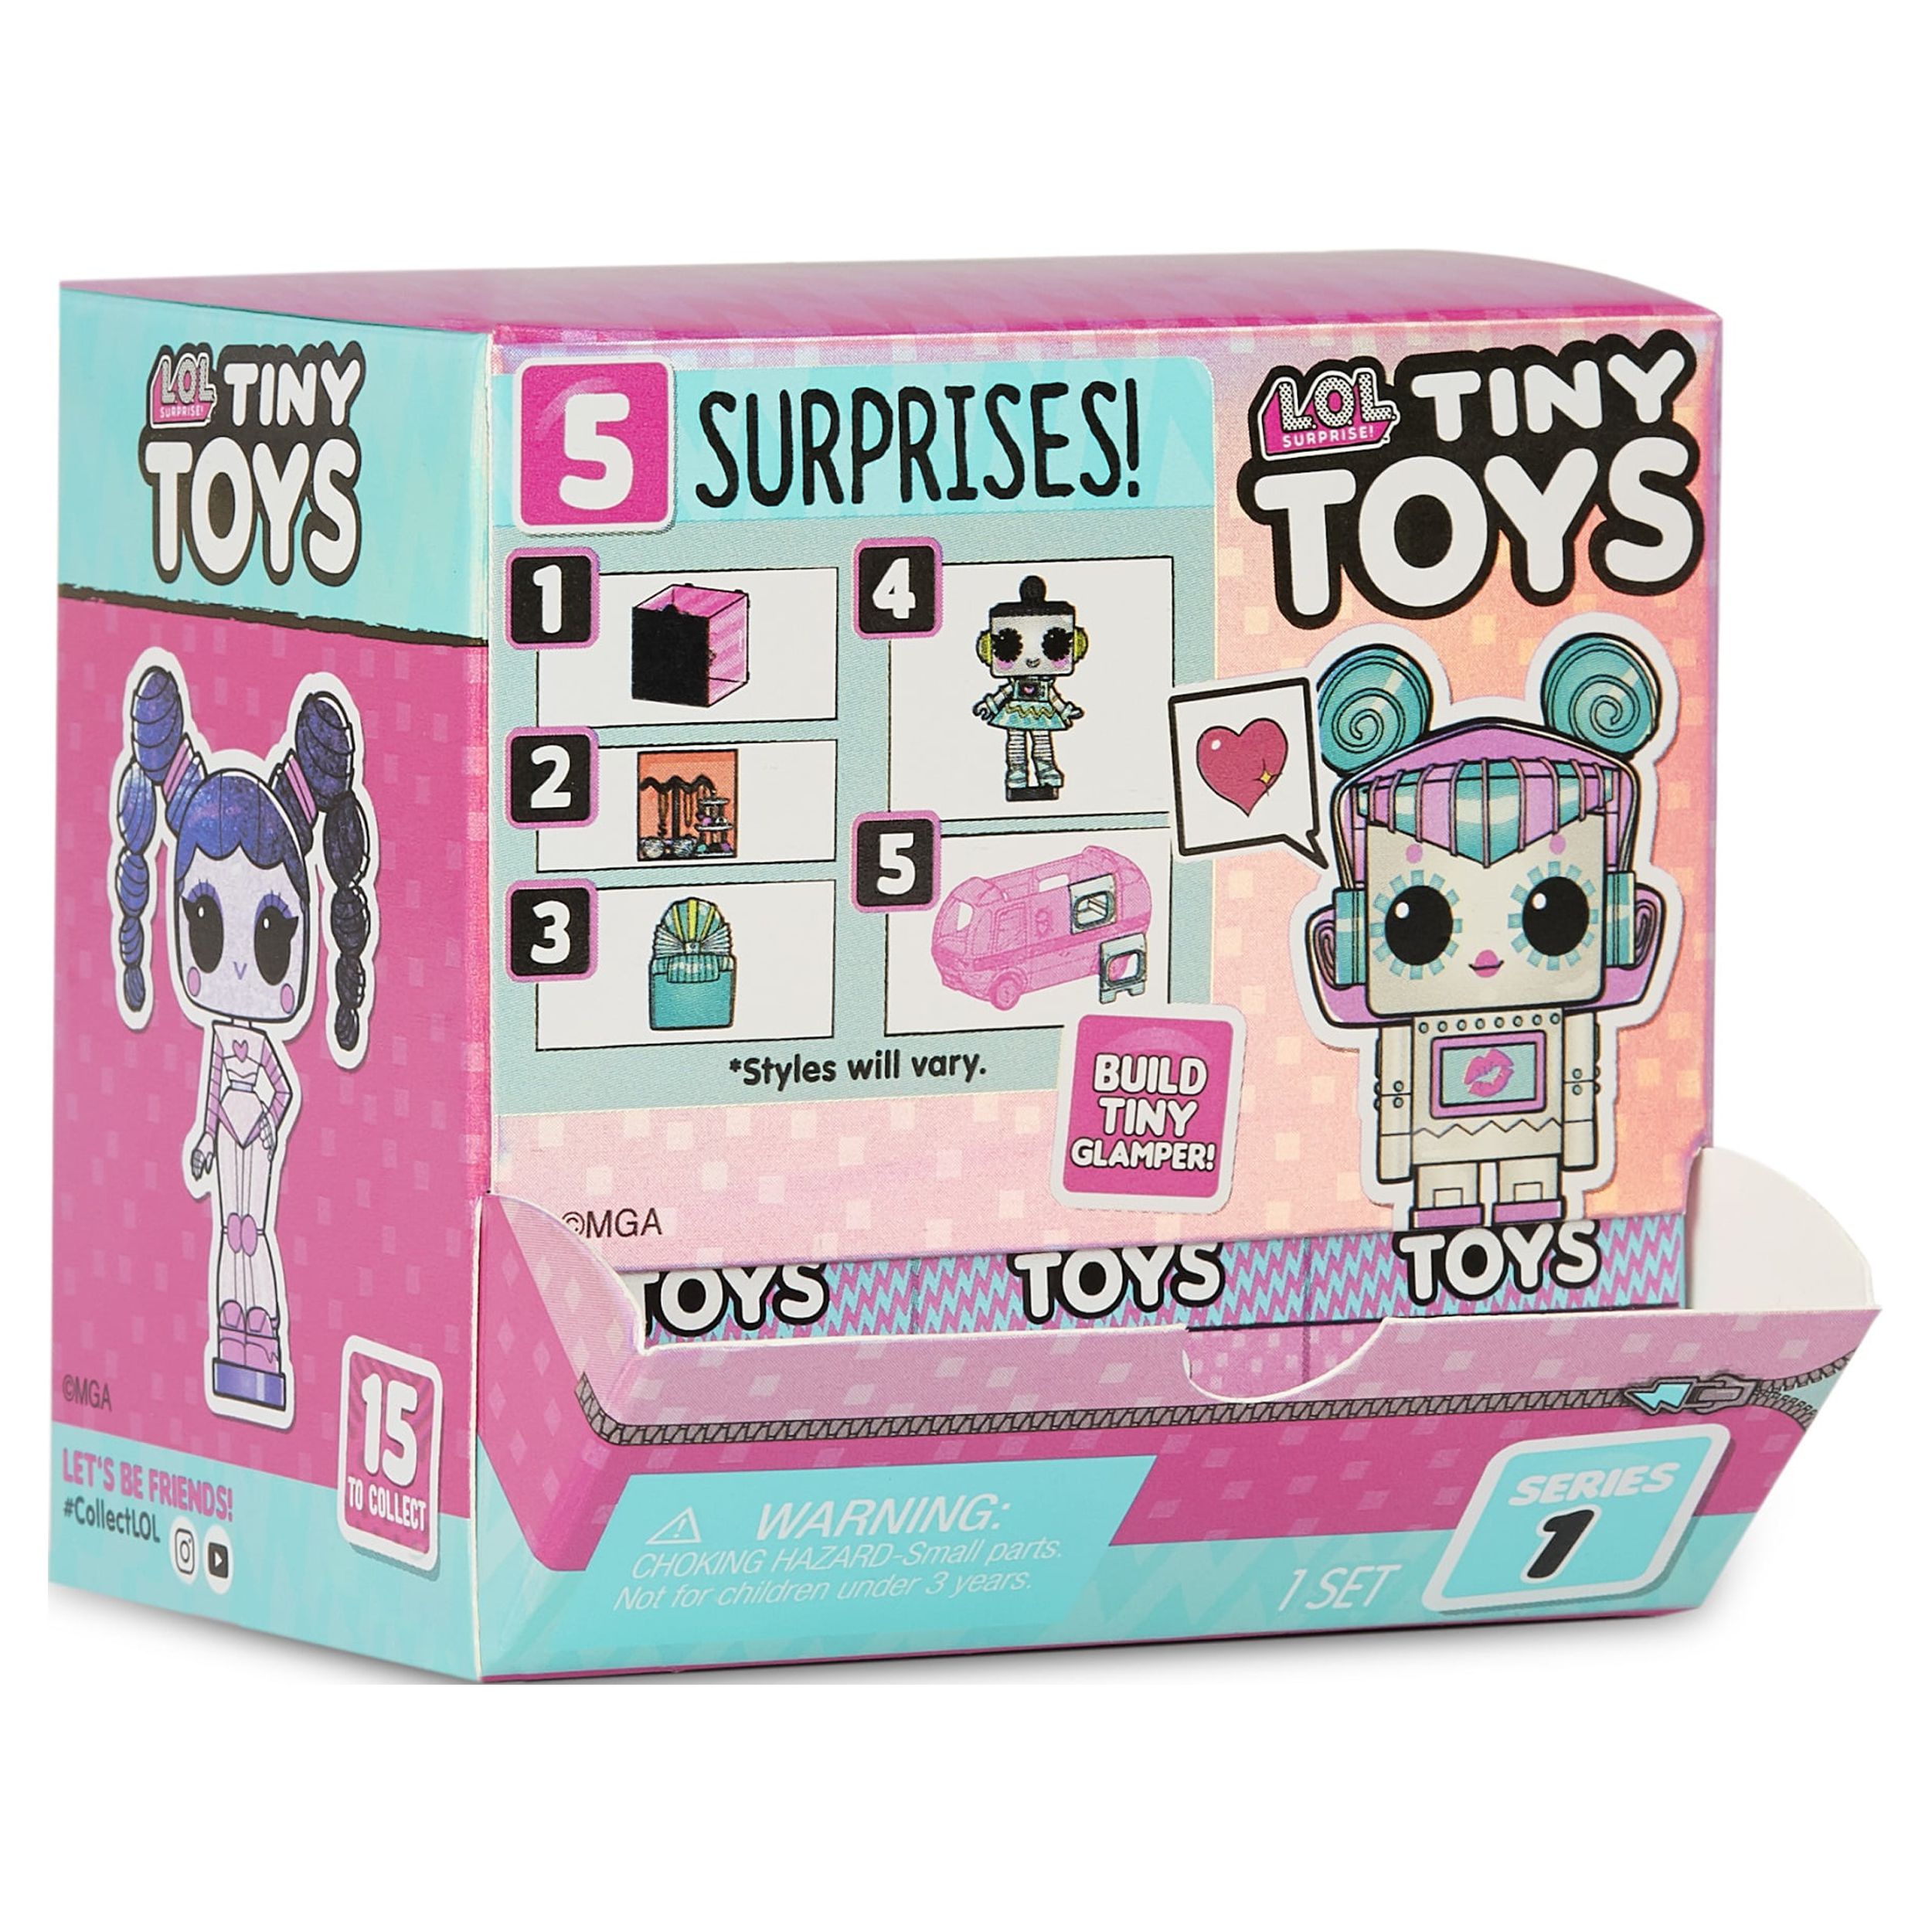 L.O.L. Surprise Tiny Toys - Collect to Build a Tiny Glamper - image 1 of 6